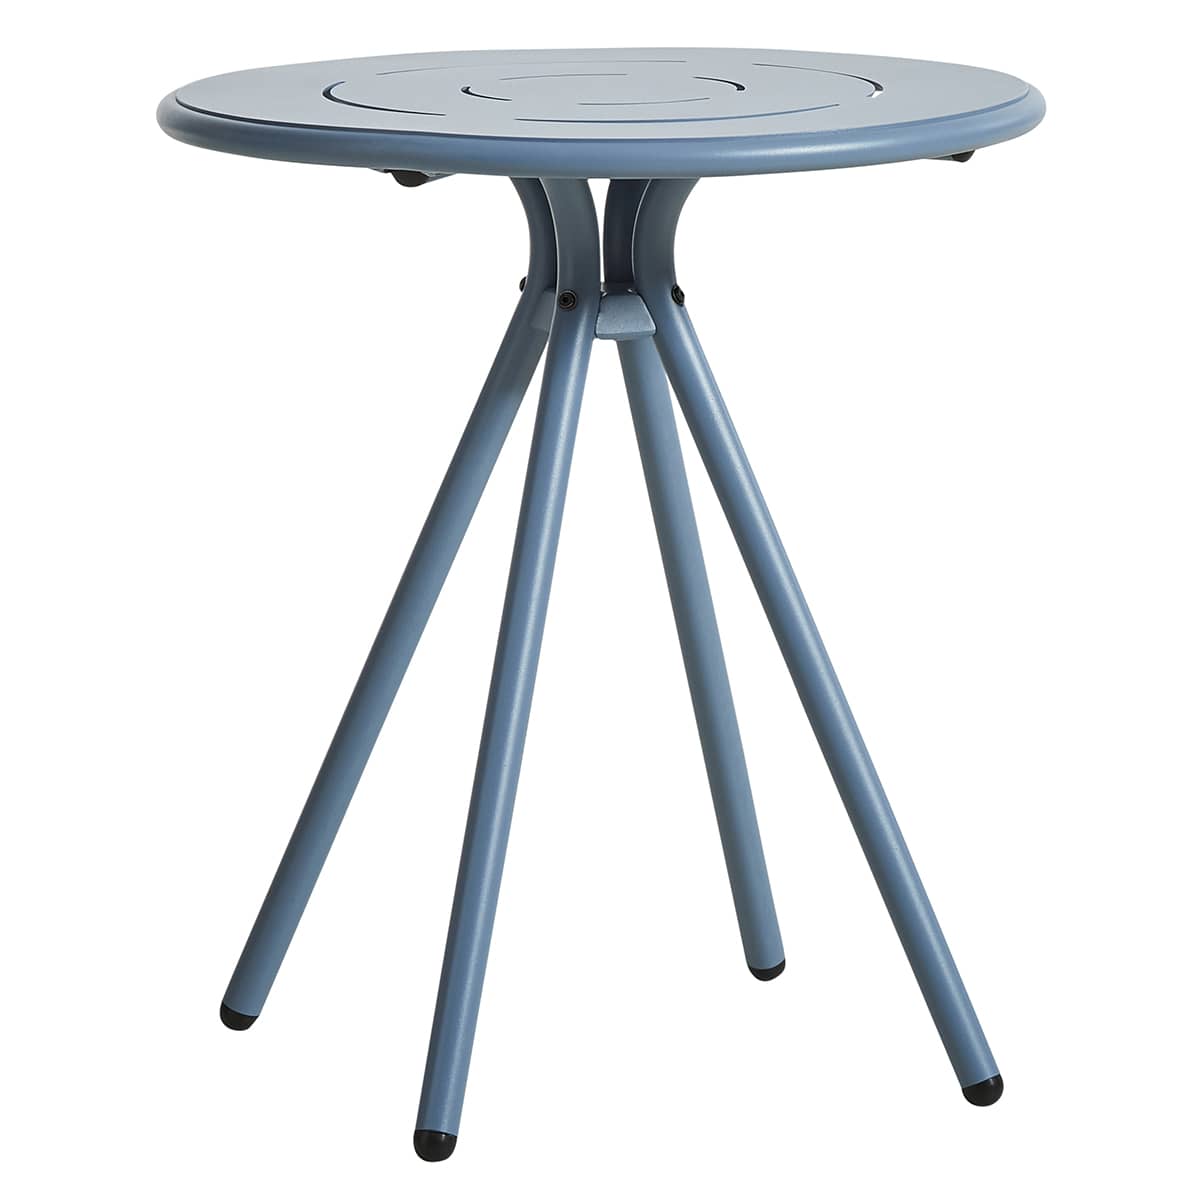 RAY outdoor CAFÉ tables, round or square, by FASTING & ROLFF for WOUD